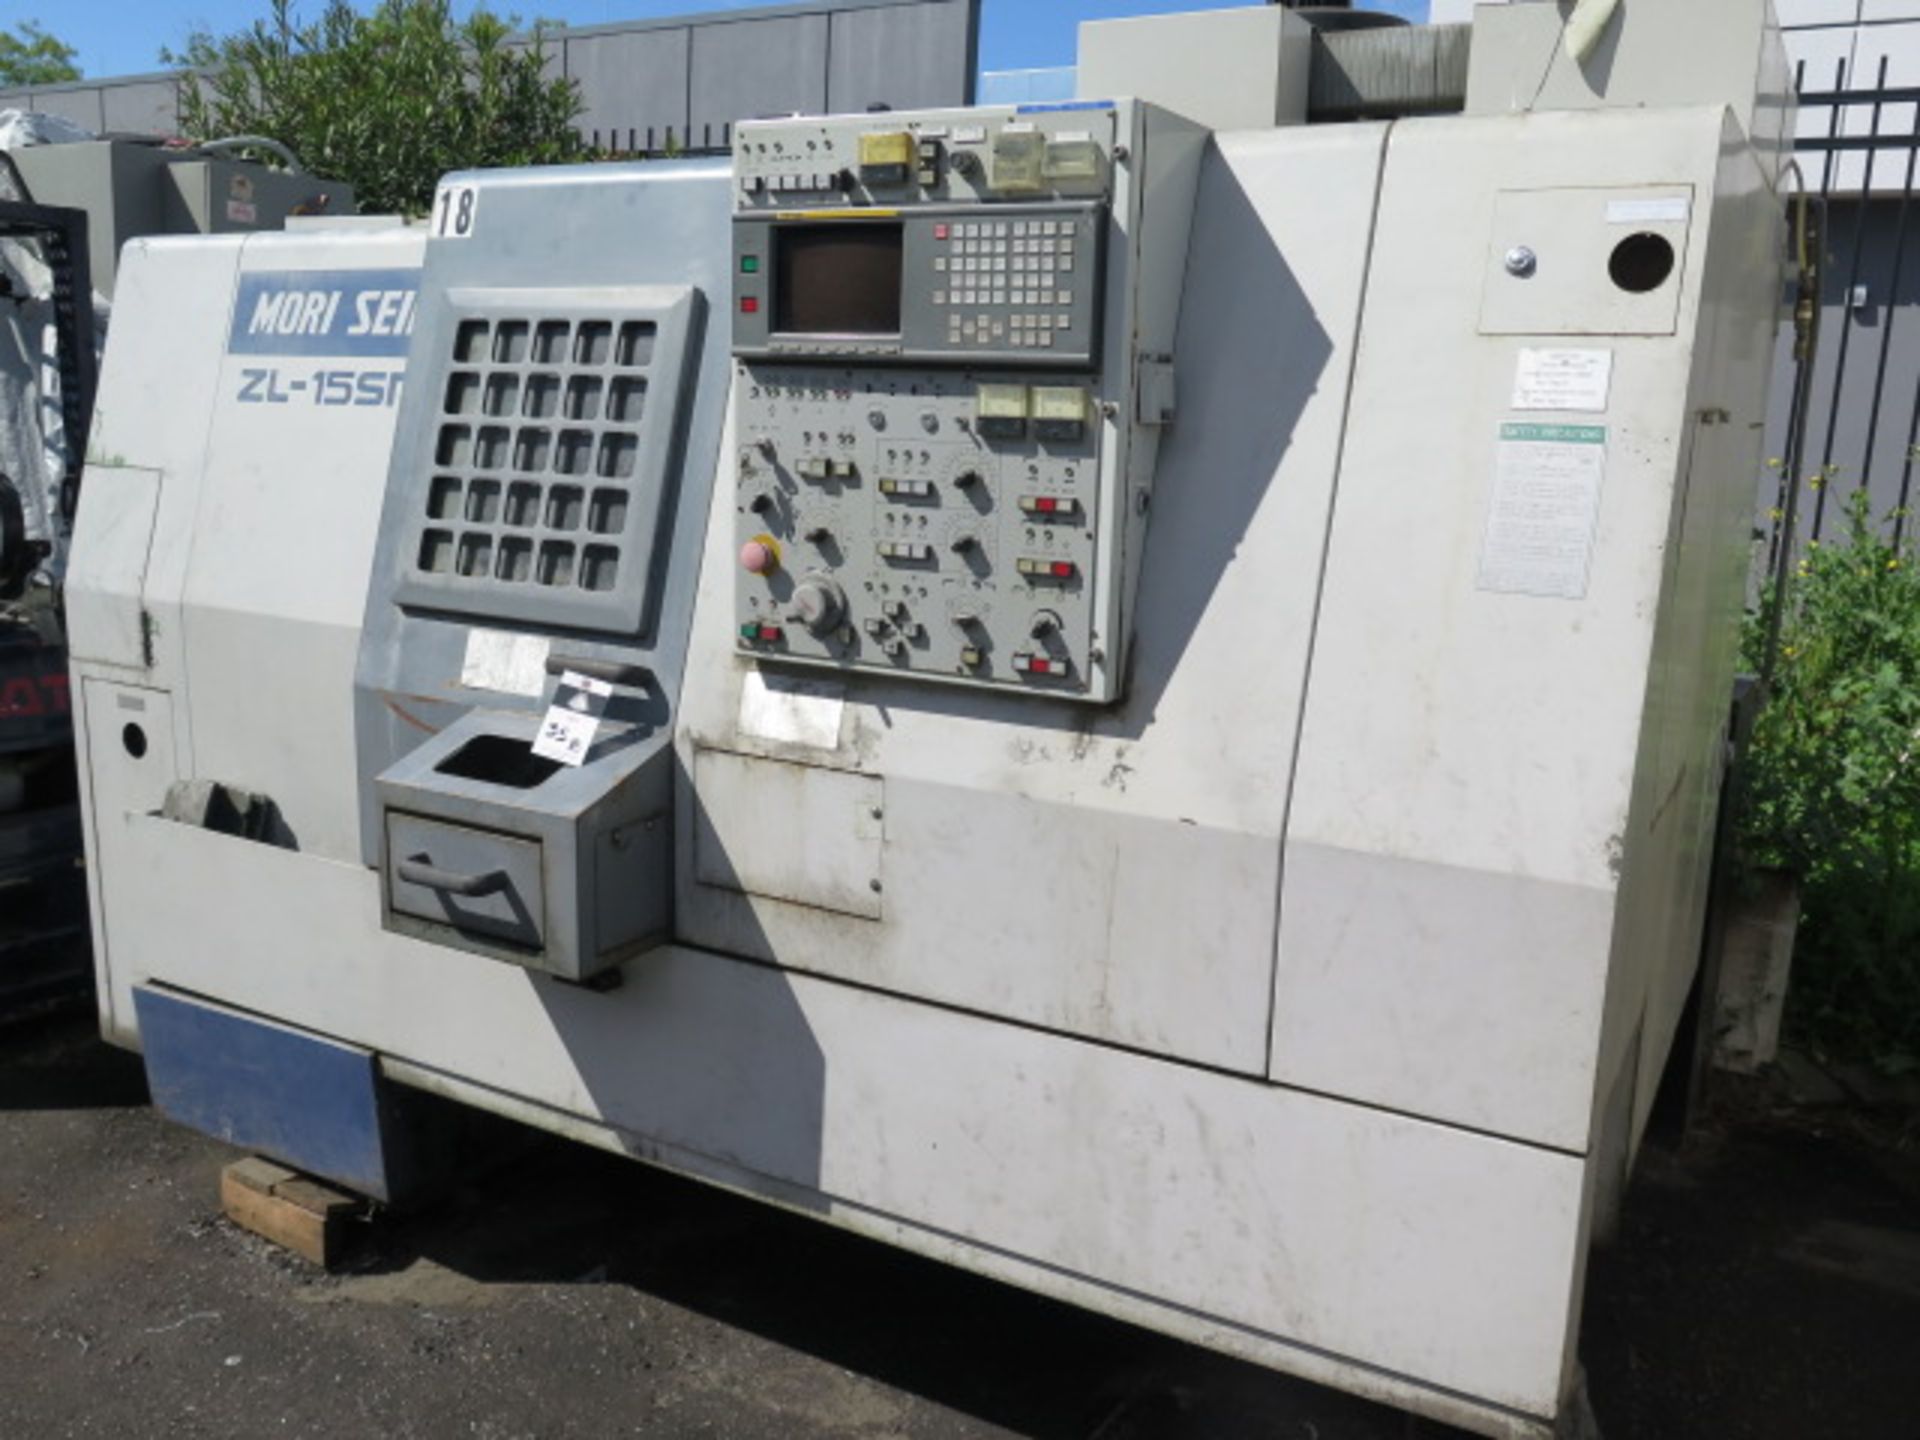 Mori Seiki ZL-15SM Twin Spindle - Twin Turret CNC Turning Center (NEEDS WORK) s/n 254, SOLD AS IS - Image 3 of 13